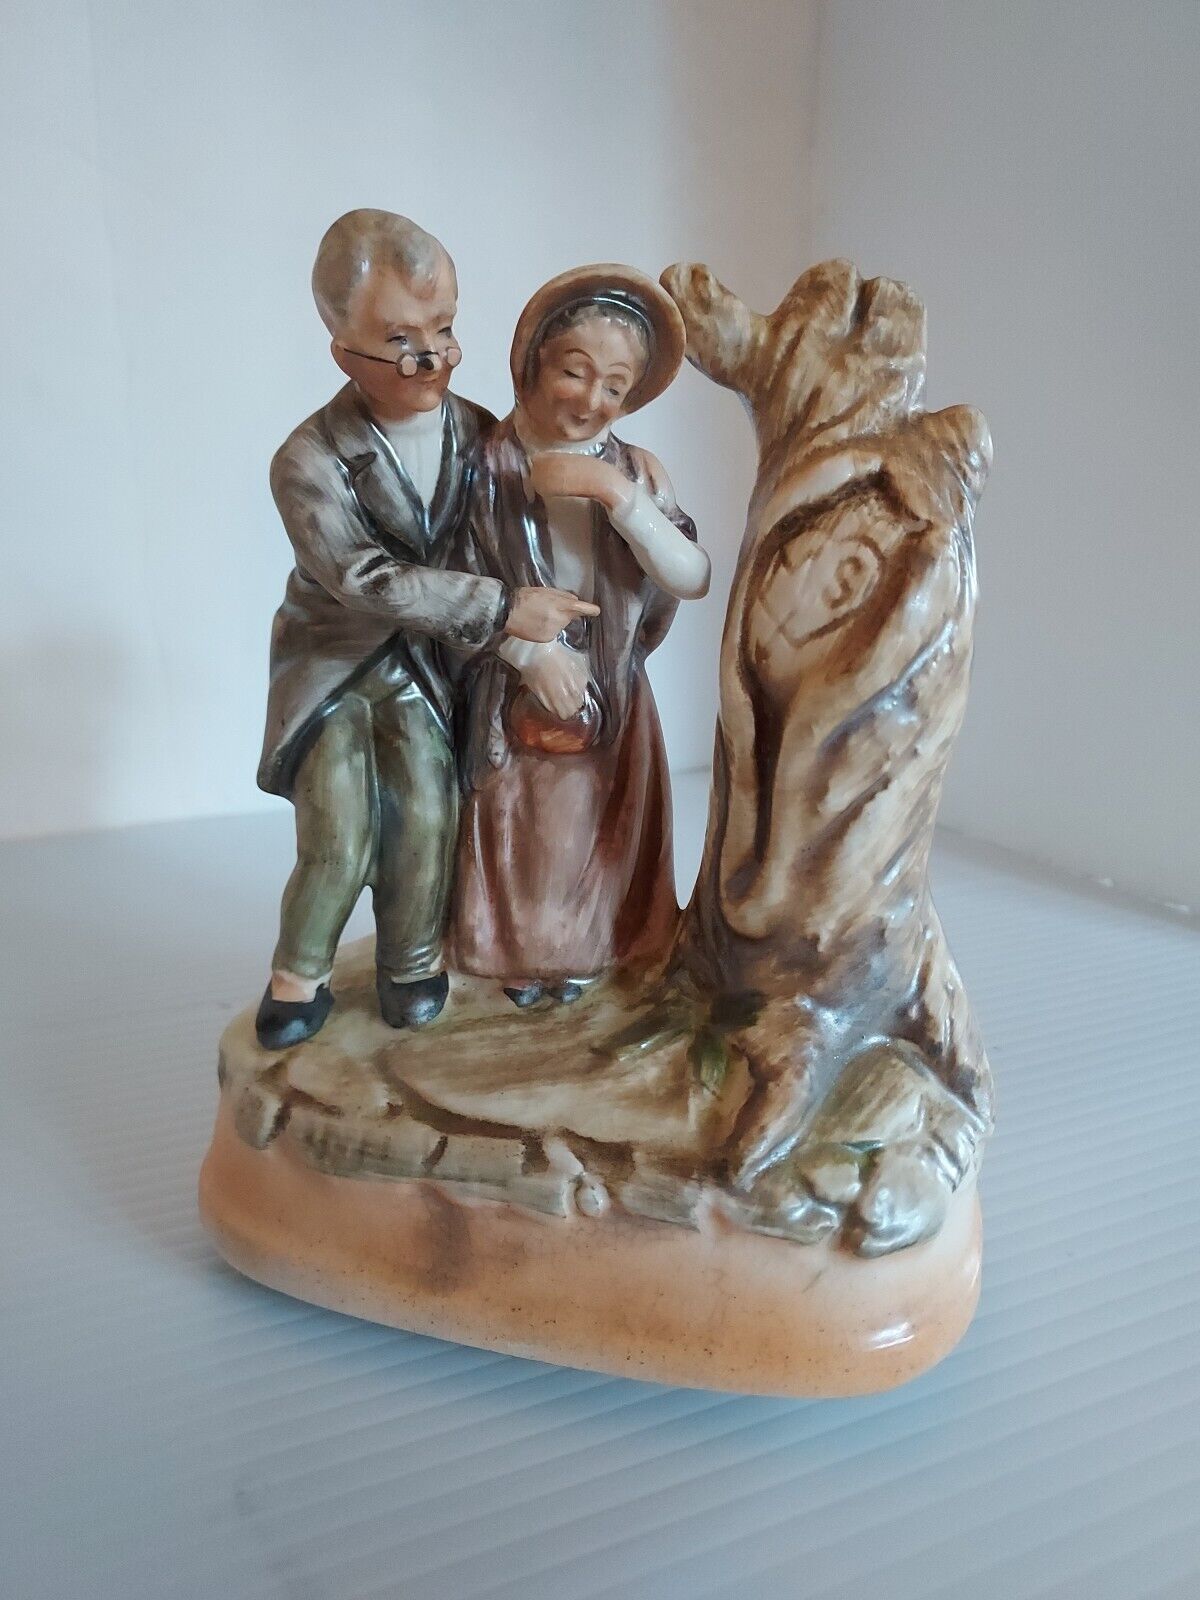 Vintage Old Couple Figure Revolving Music Box Figurine Plays Those Were The Days